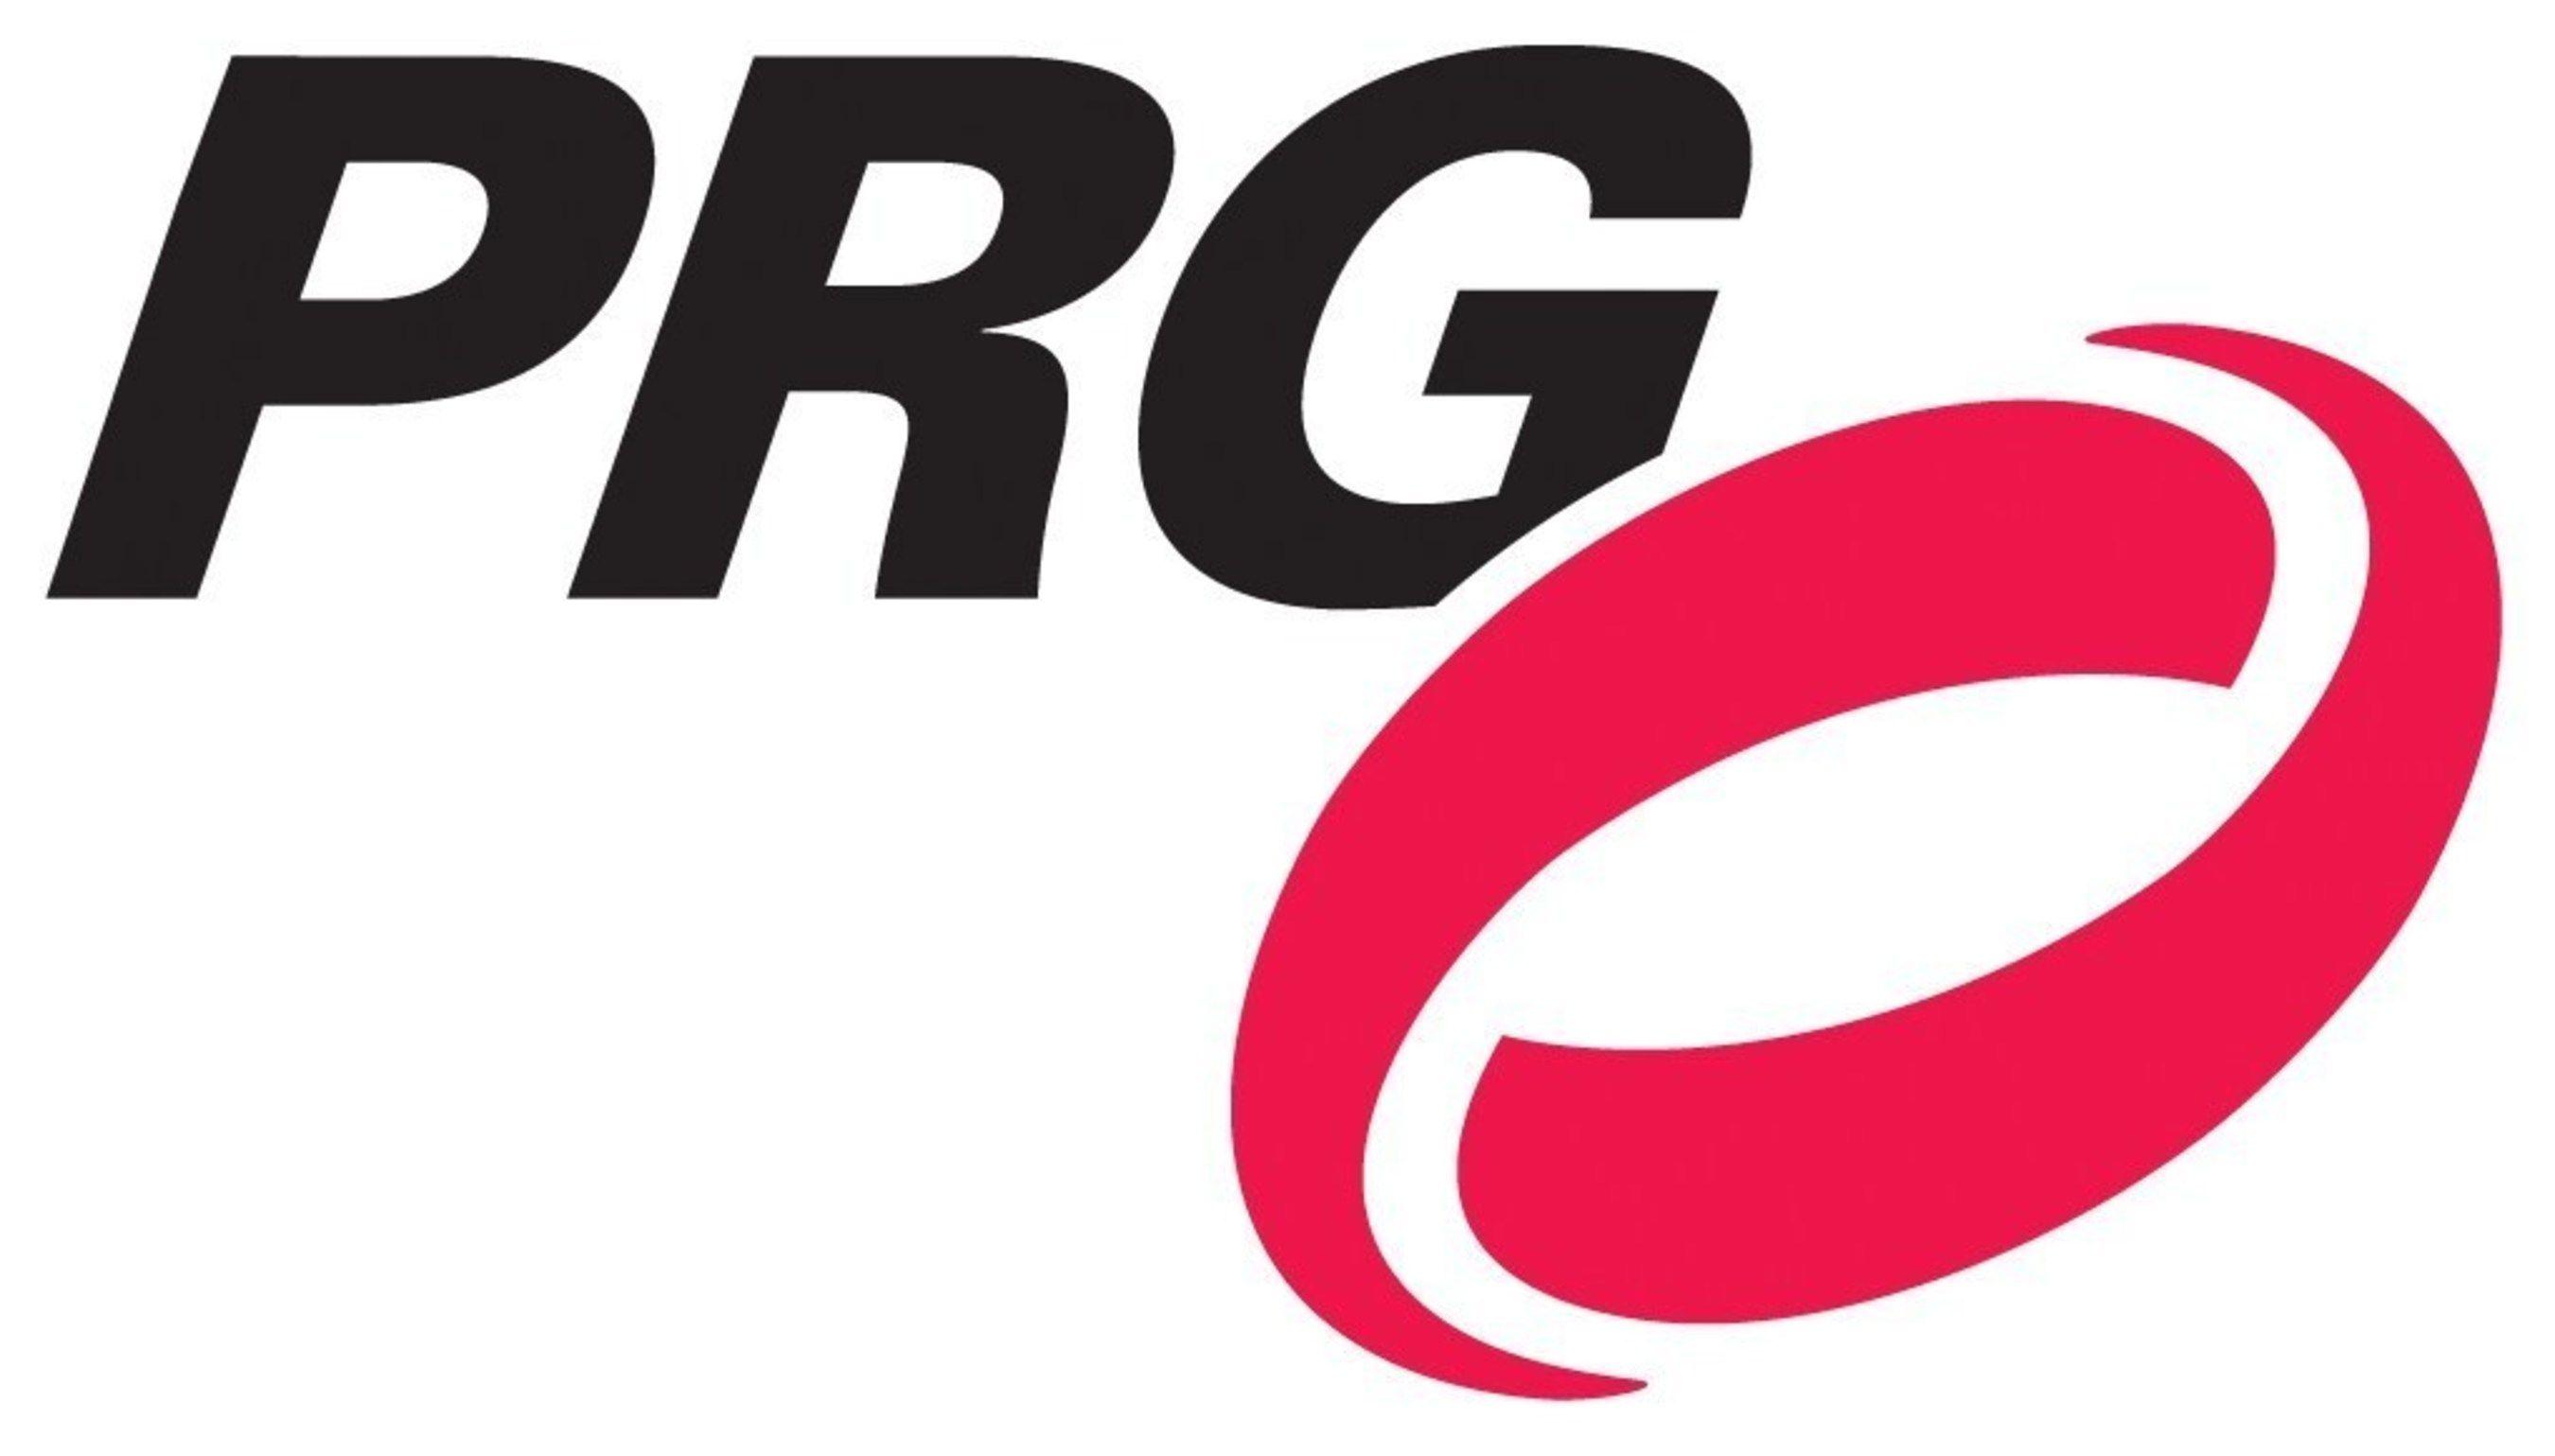 PRG Logo - Production Resource Group Completes Acquisition of Assets of DPS, Inc.